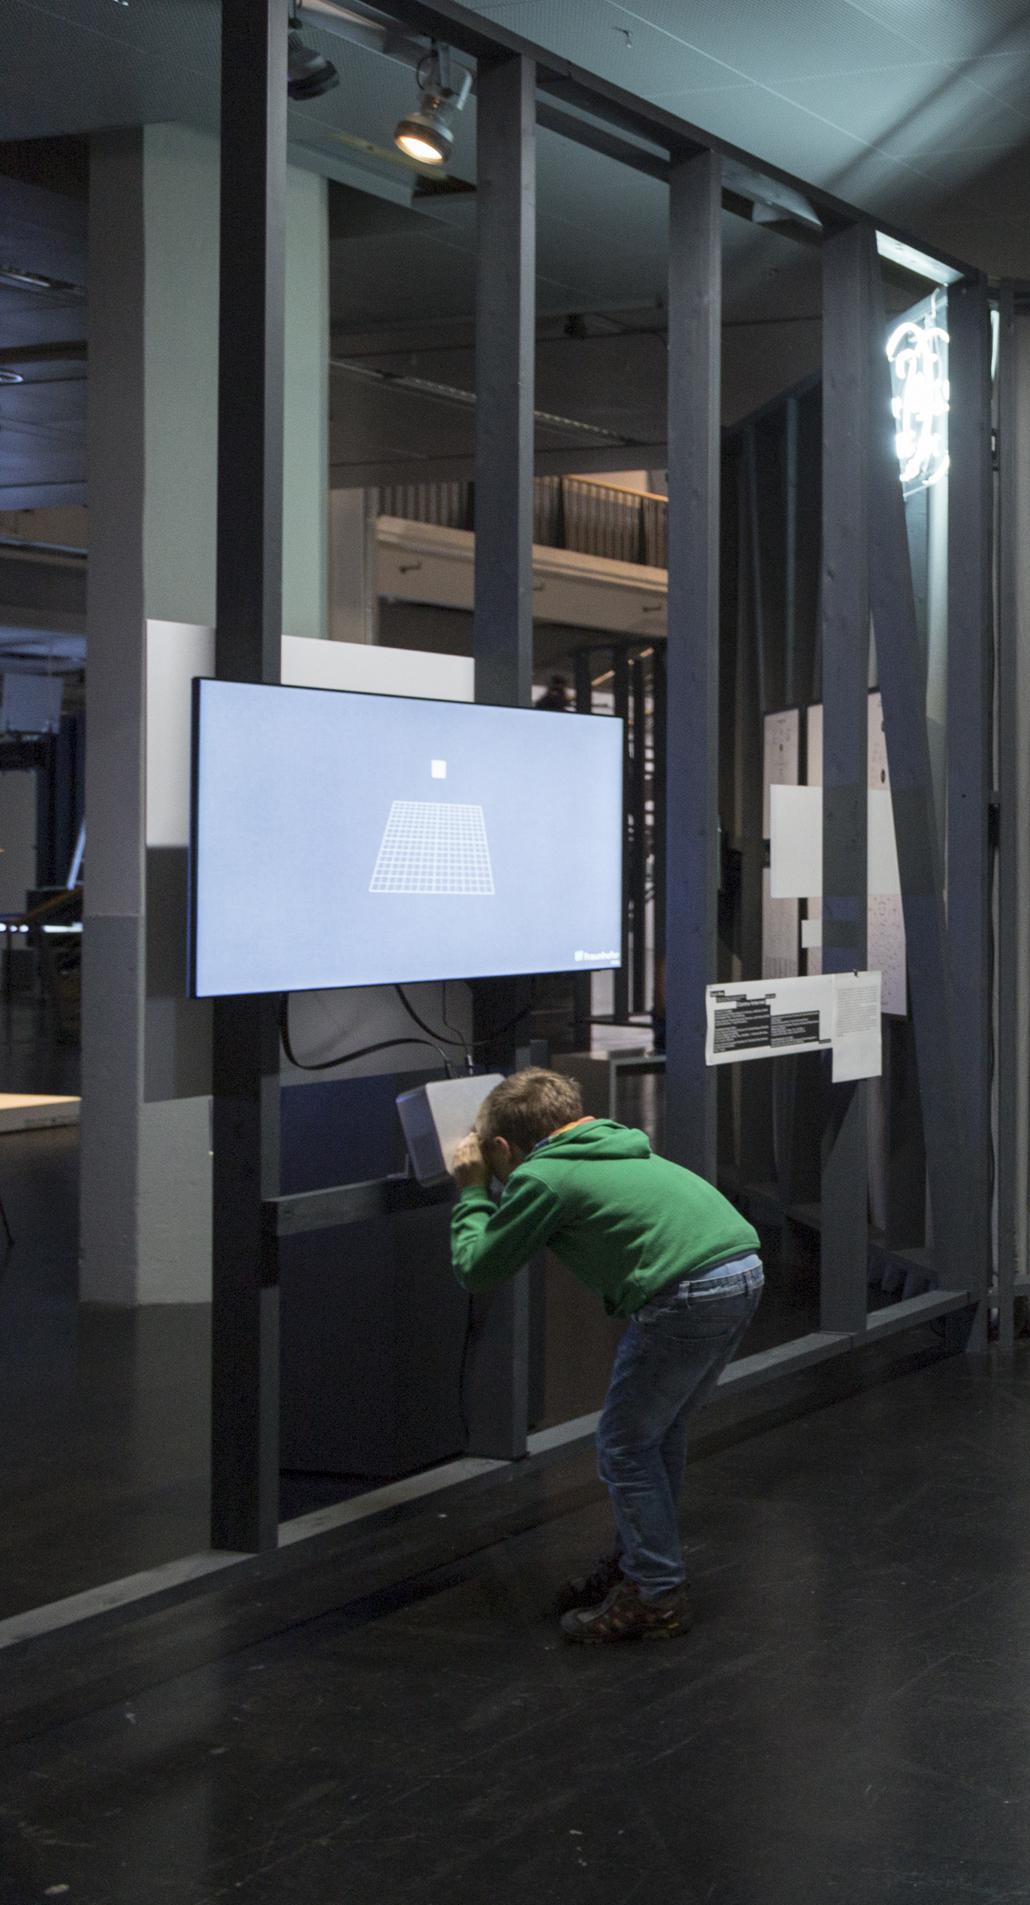 A boy looks through a box. At the wall you can see a screen with a grid box